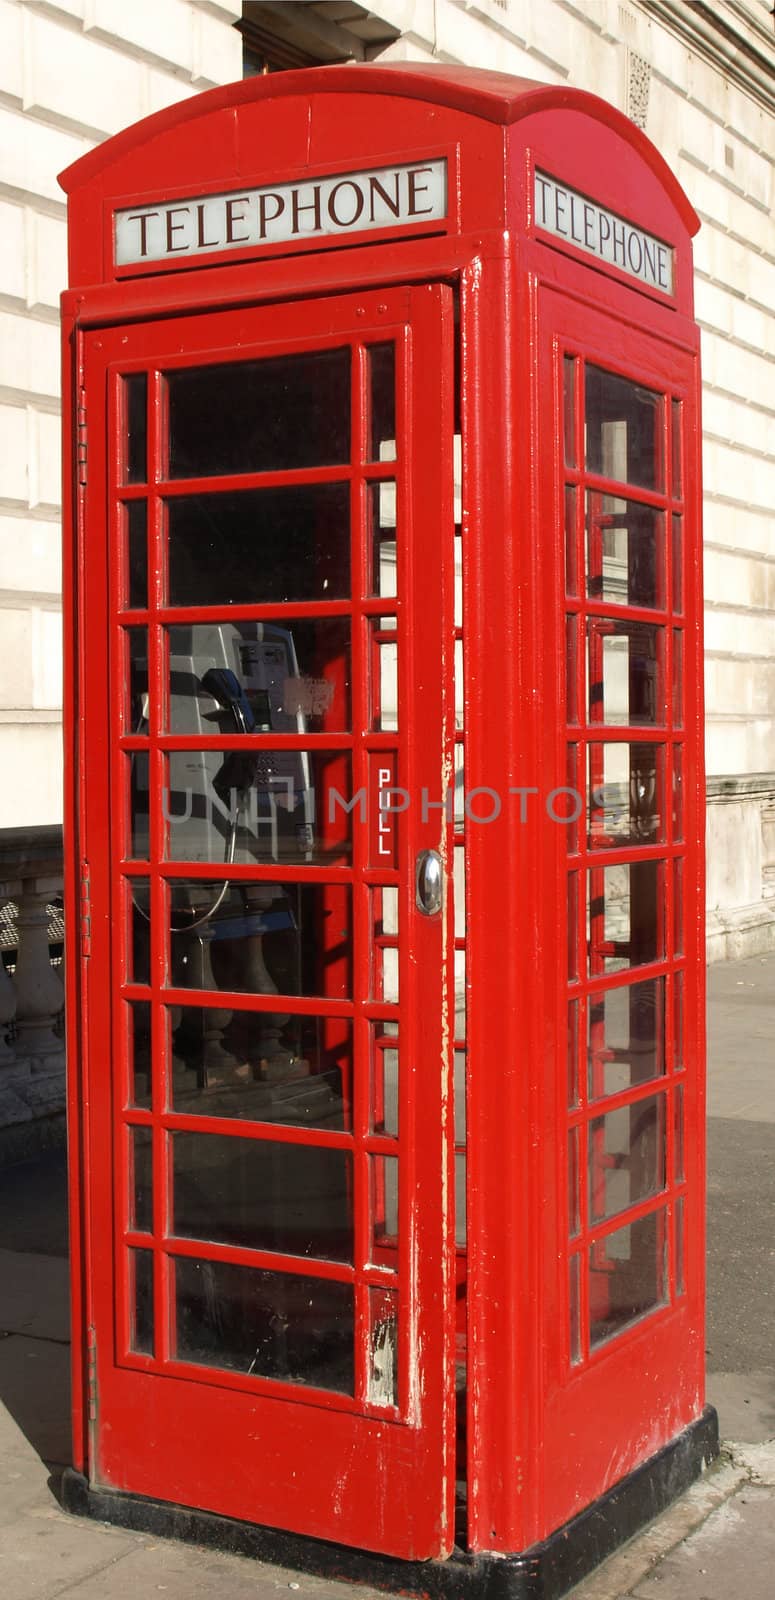 Traditional Red Telephone Box in London, UK